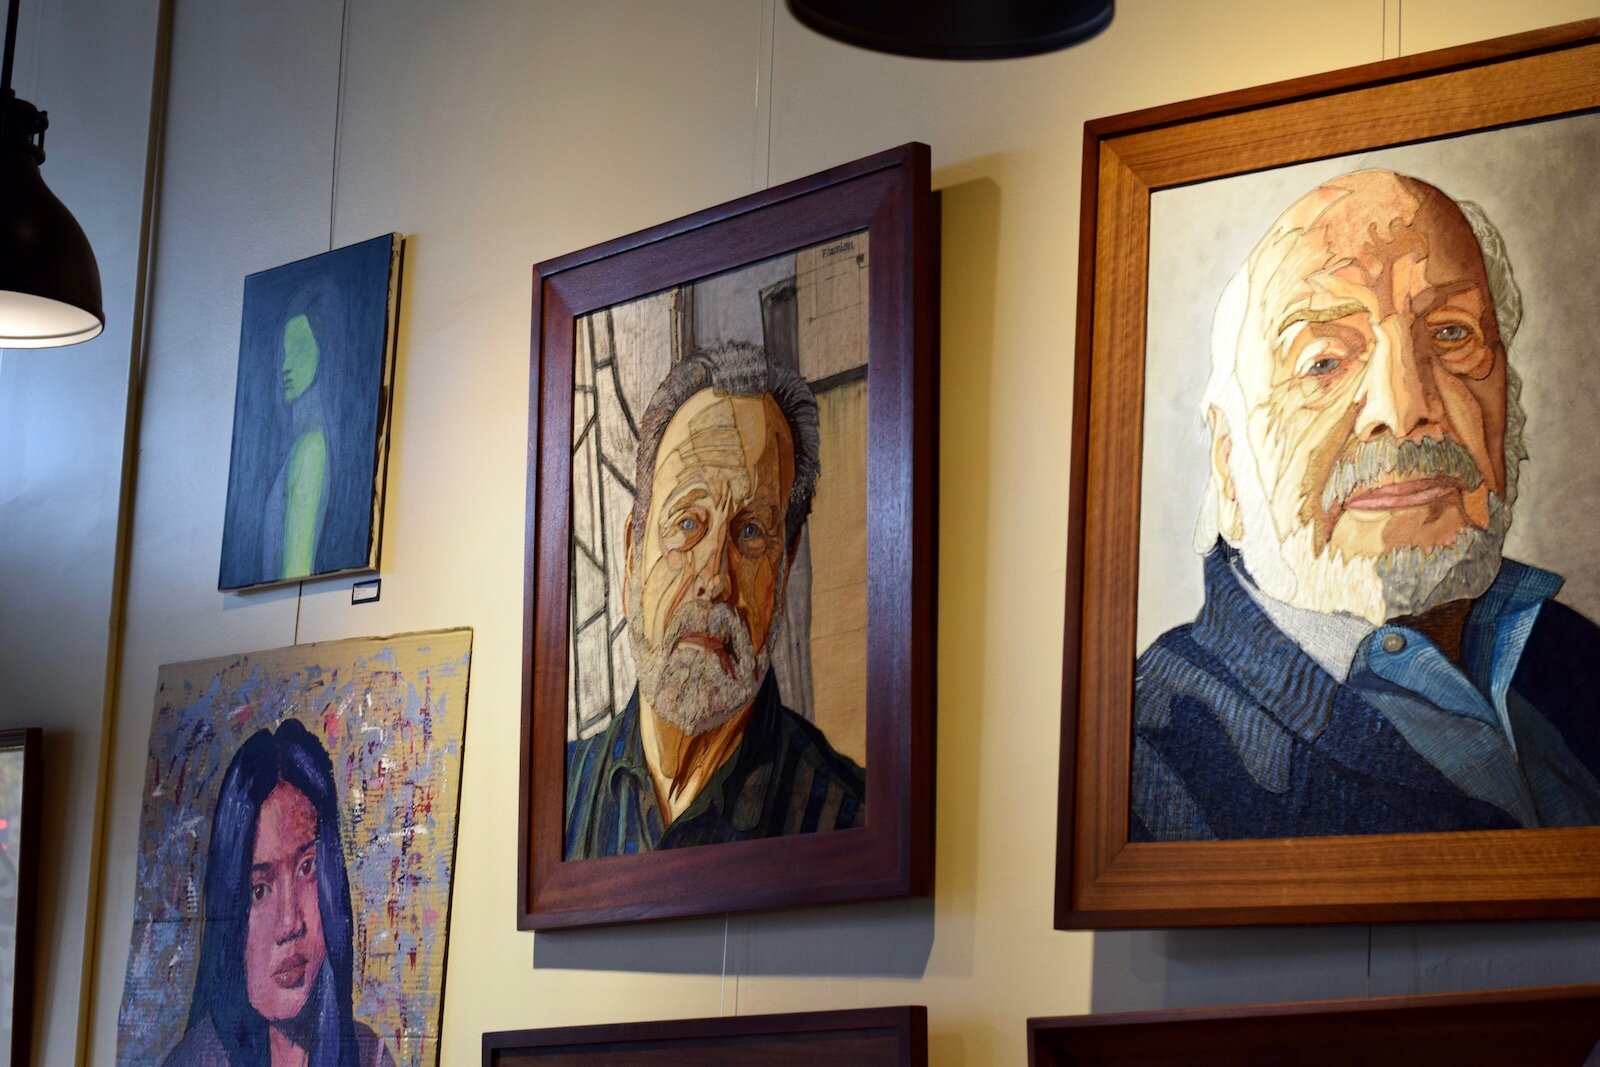 Davey's Delicious Bagels displays the work of local artists, including high school students.